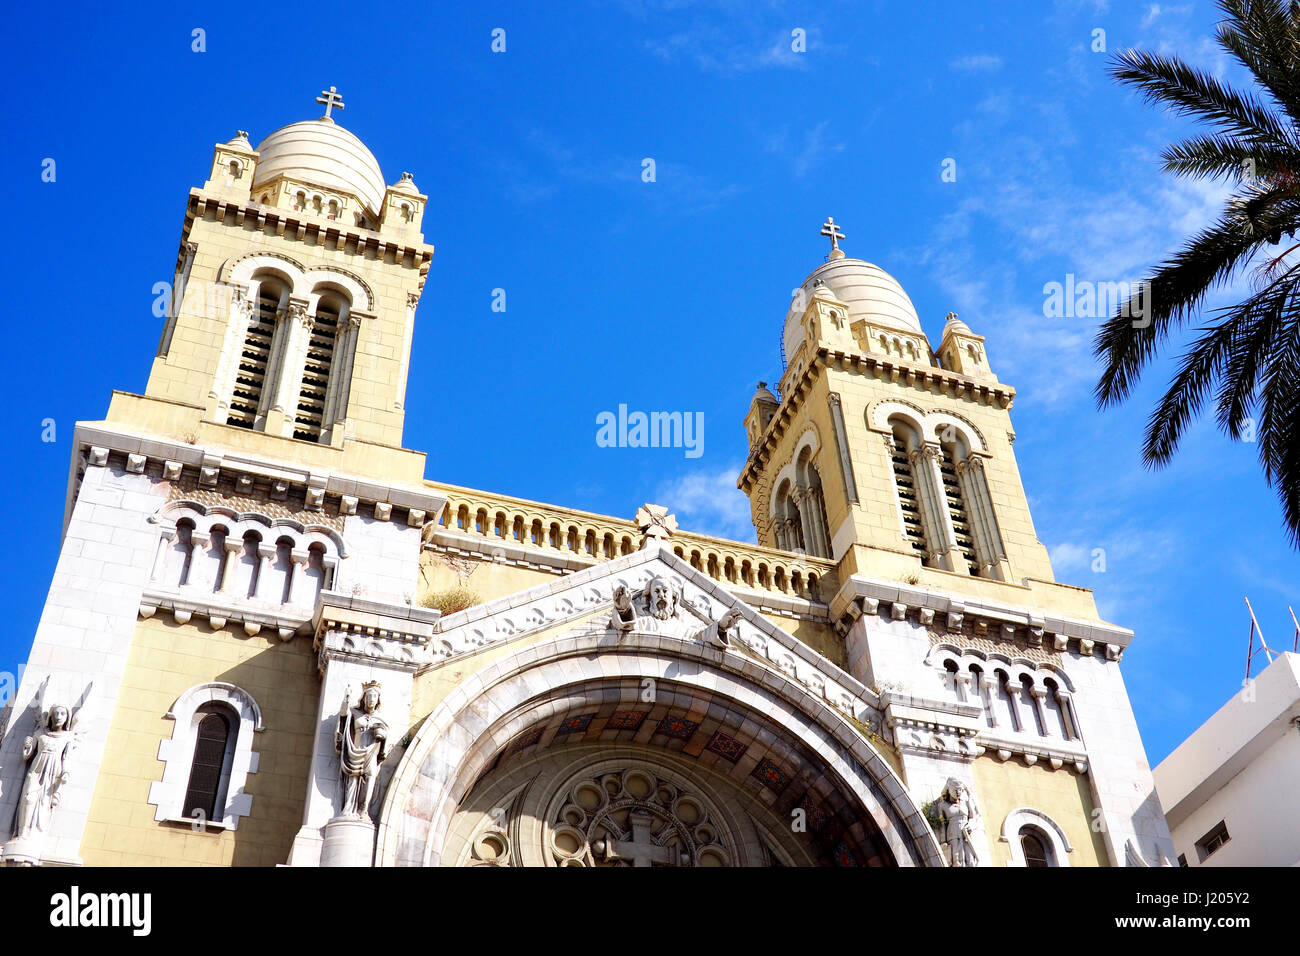 The catholic Cathedral of St Vincent de Paul at the Place de l'Independence in the Ville Nouvelle. Tunisia, Tunis Stock Photo